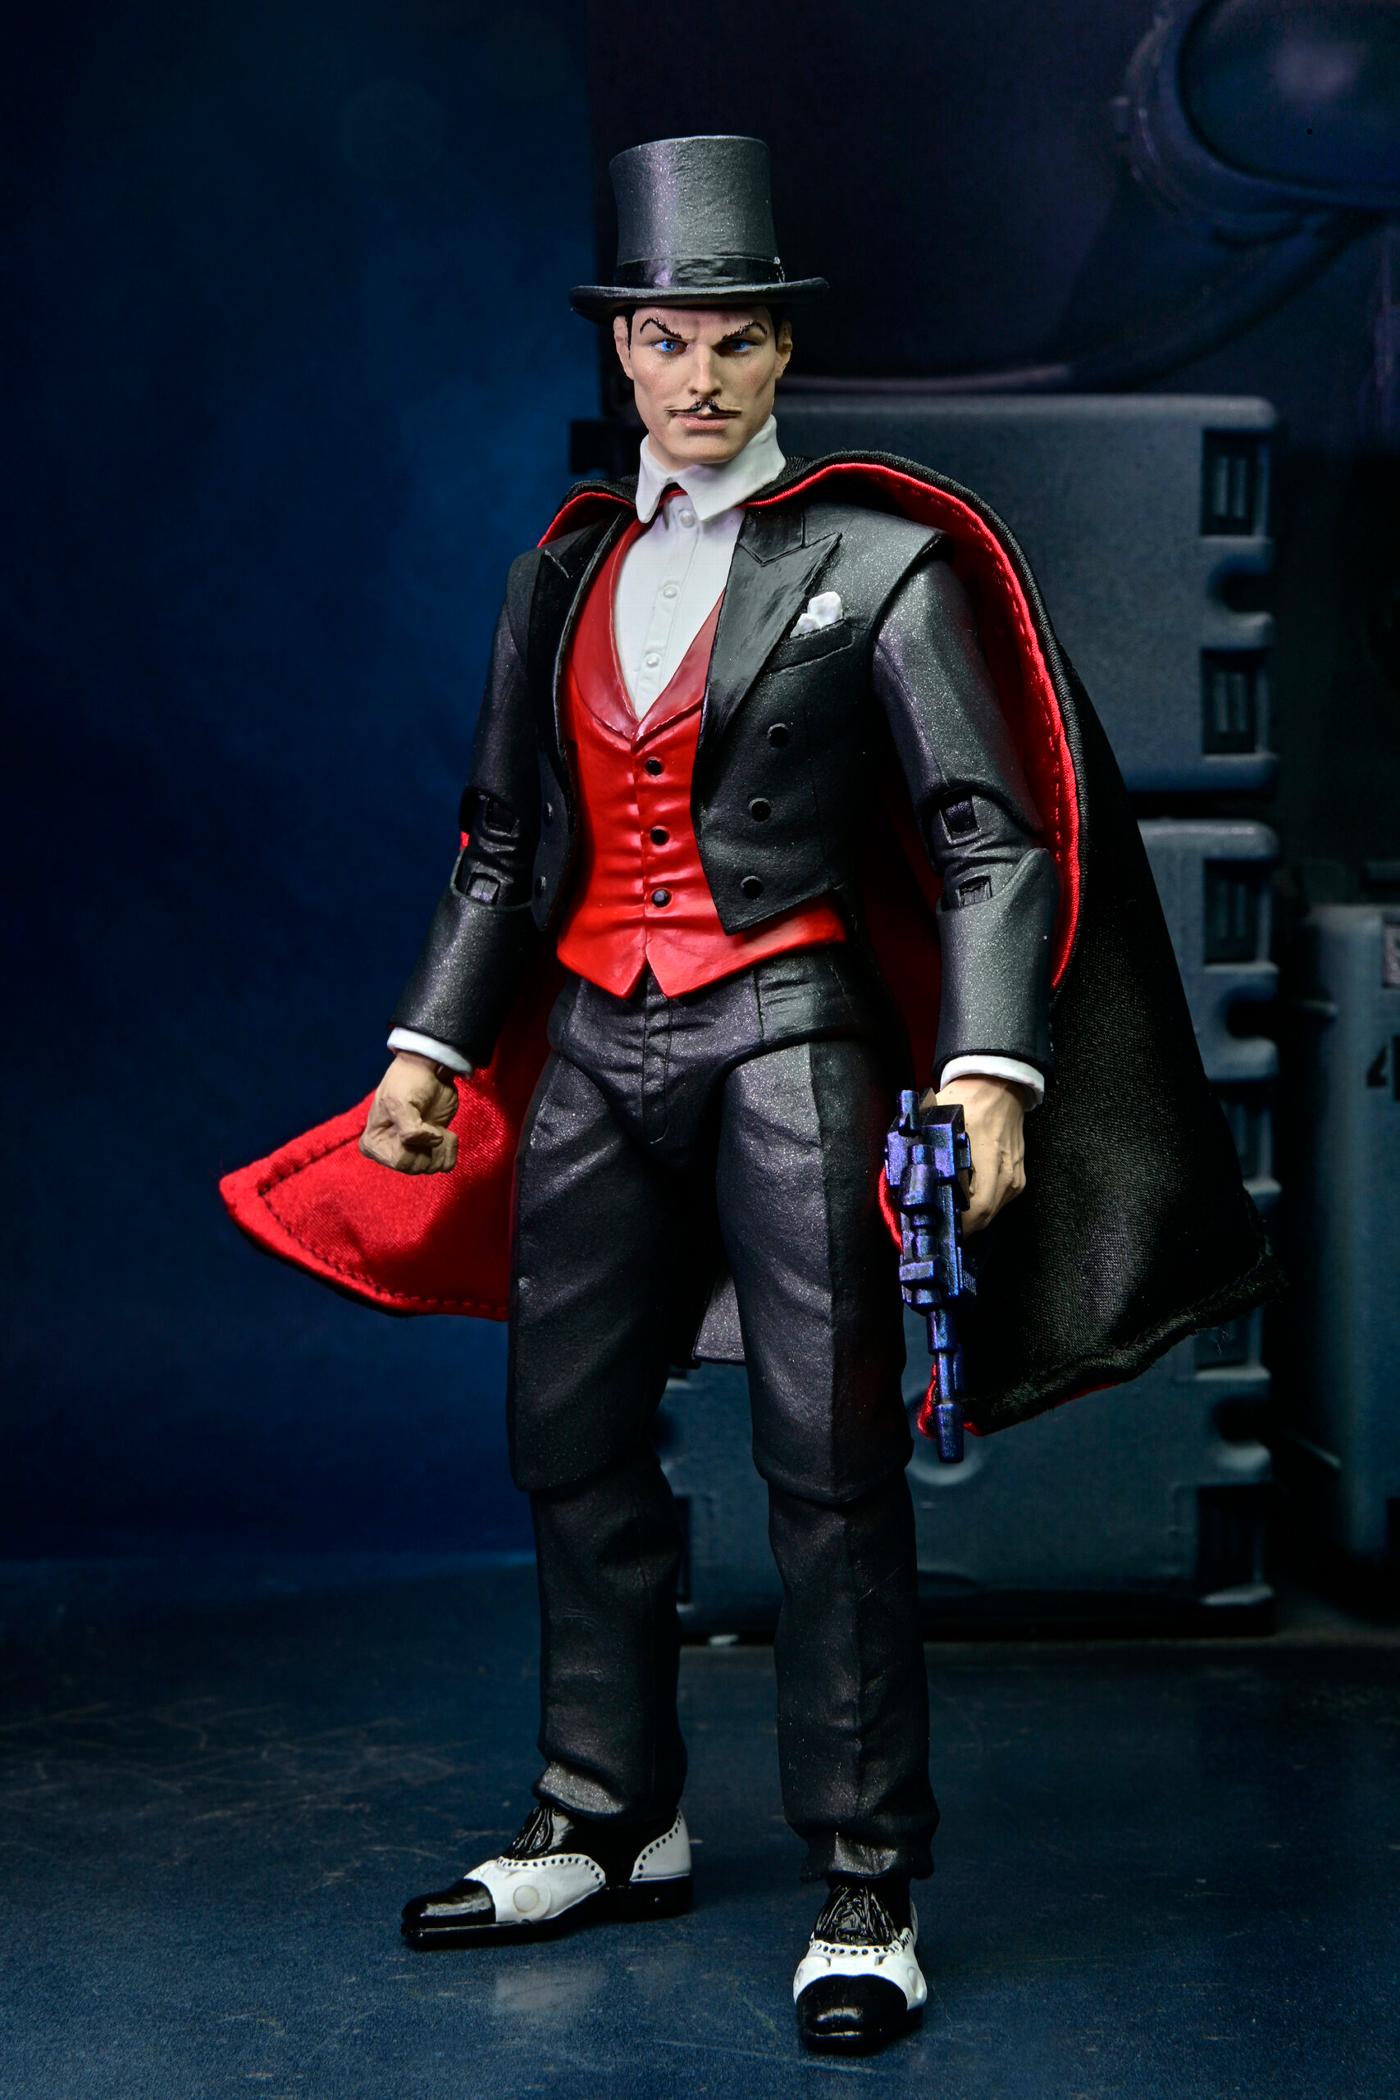 Mandrake The Magician: Master of Illusion Action Figure: Defenders of the Earth. 